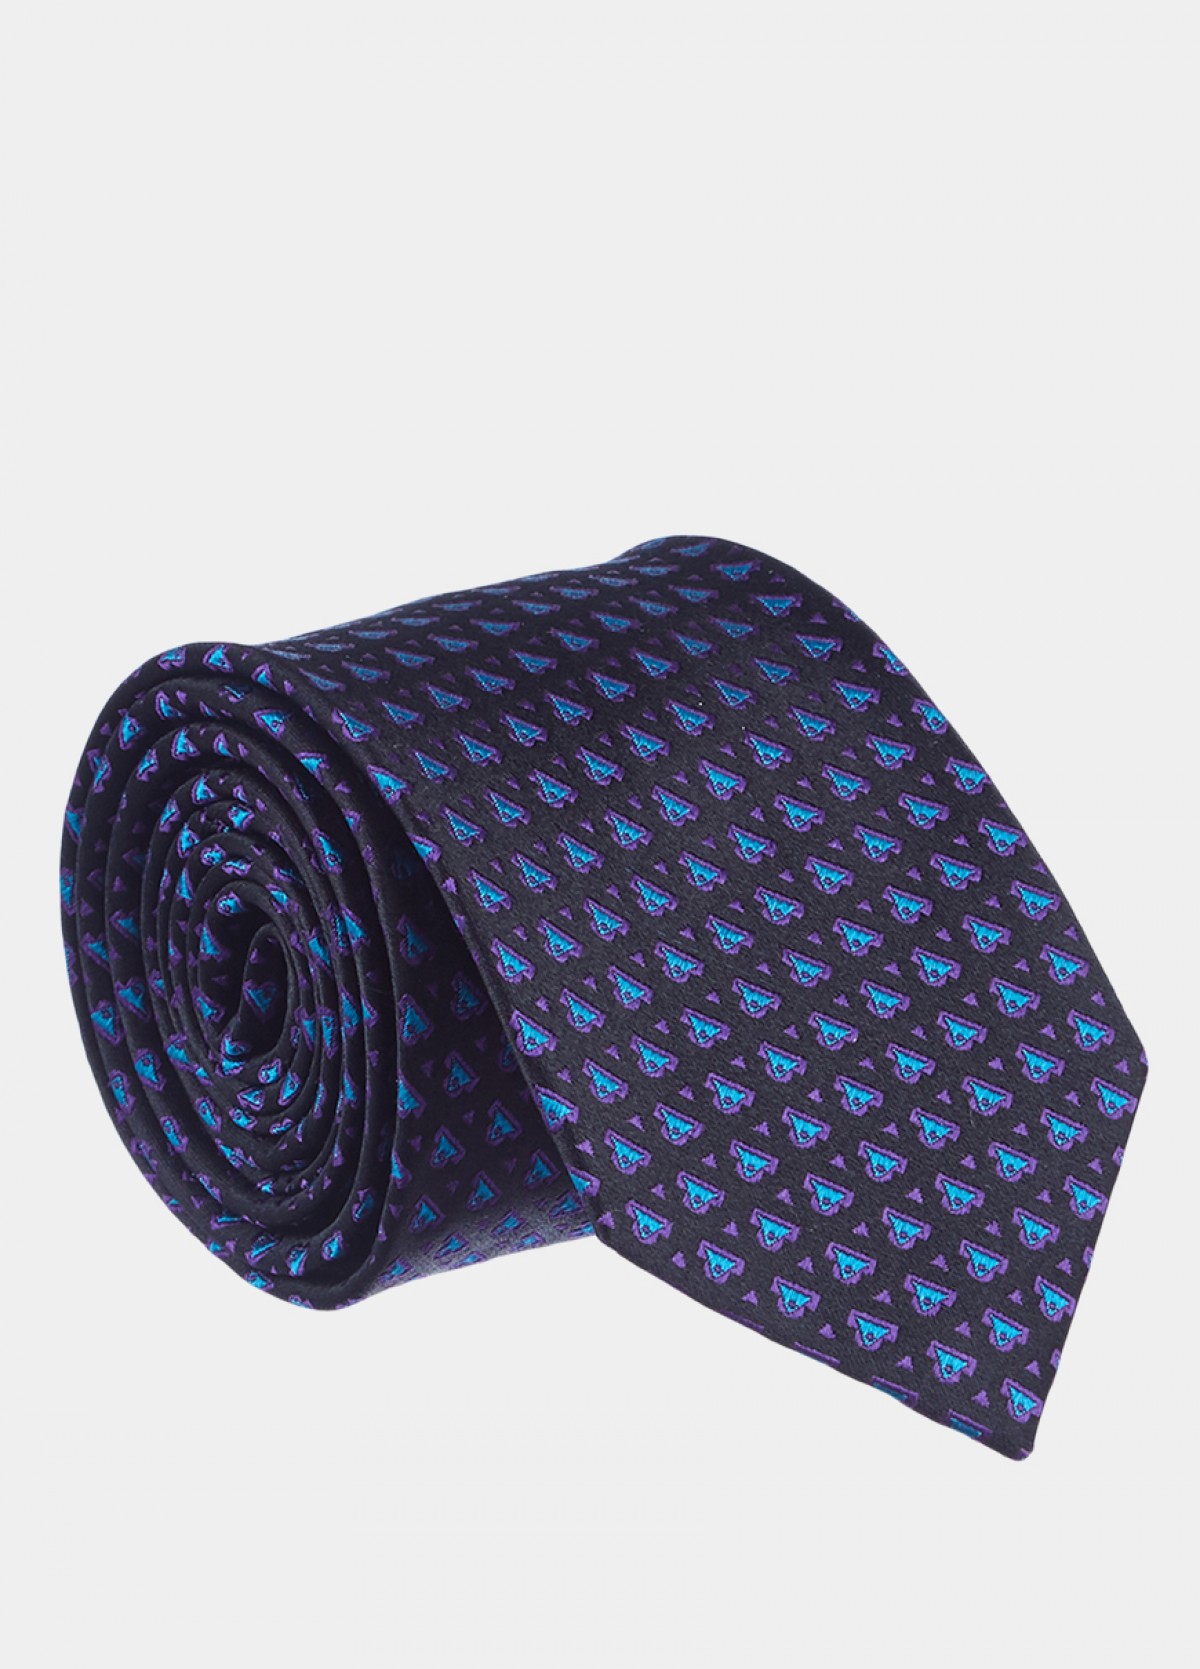 The Silk Stain Resistant Tie